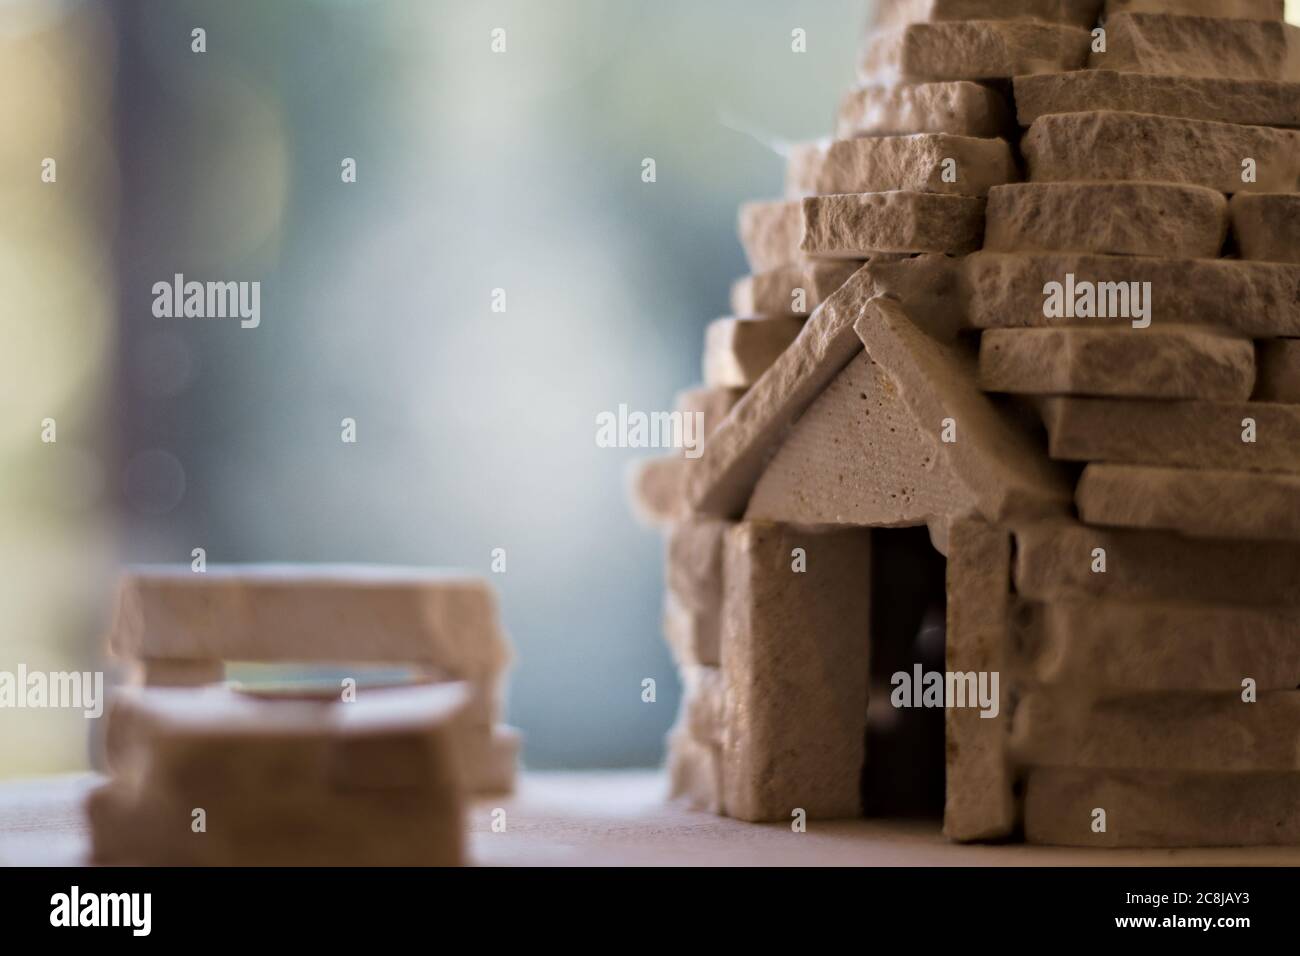 Miniature house model made from stones Stock Photo